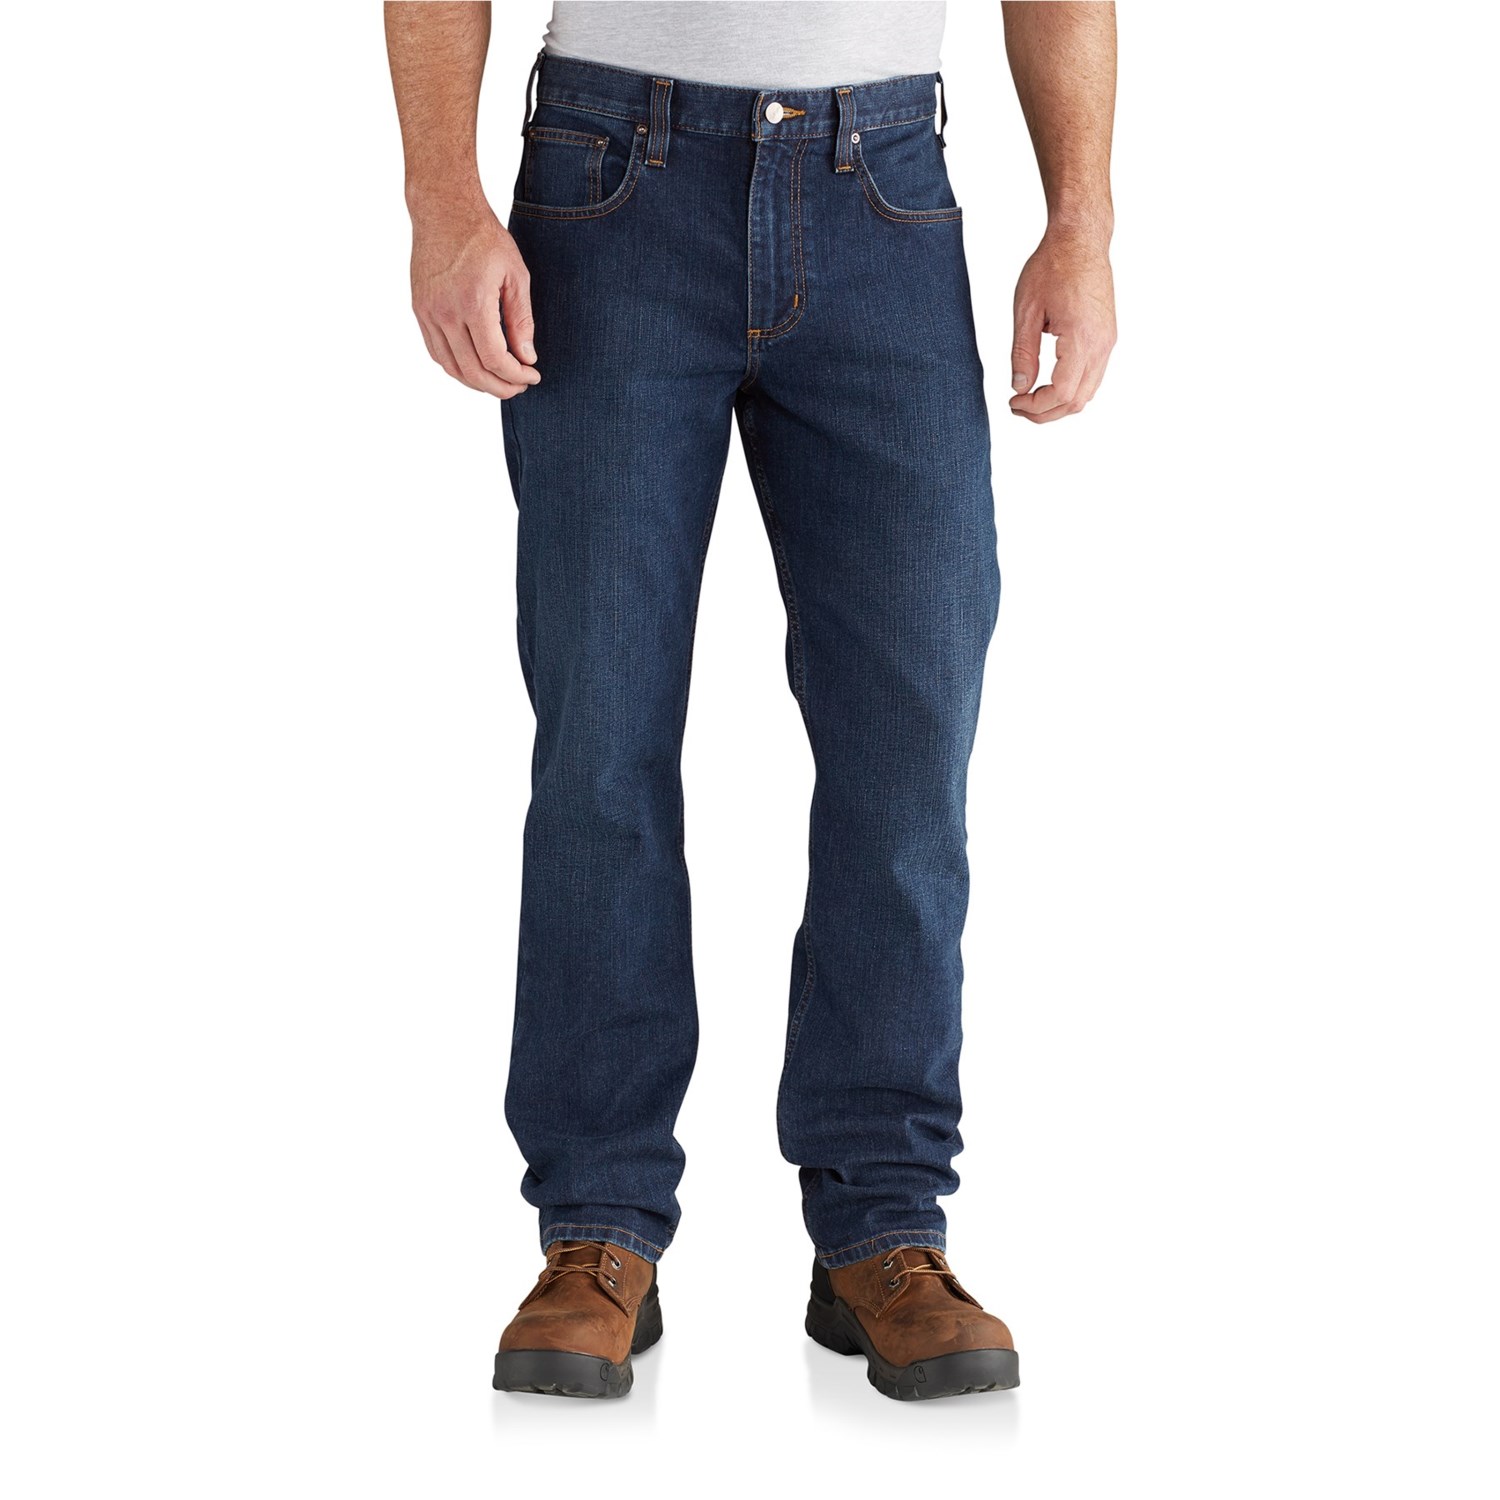 Carhartt 102804 Rugged Flex® Relaxed Fit Jeans - Straight Leg, Factory ...